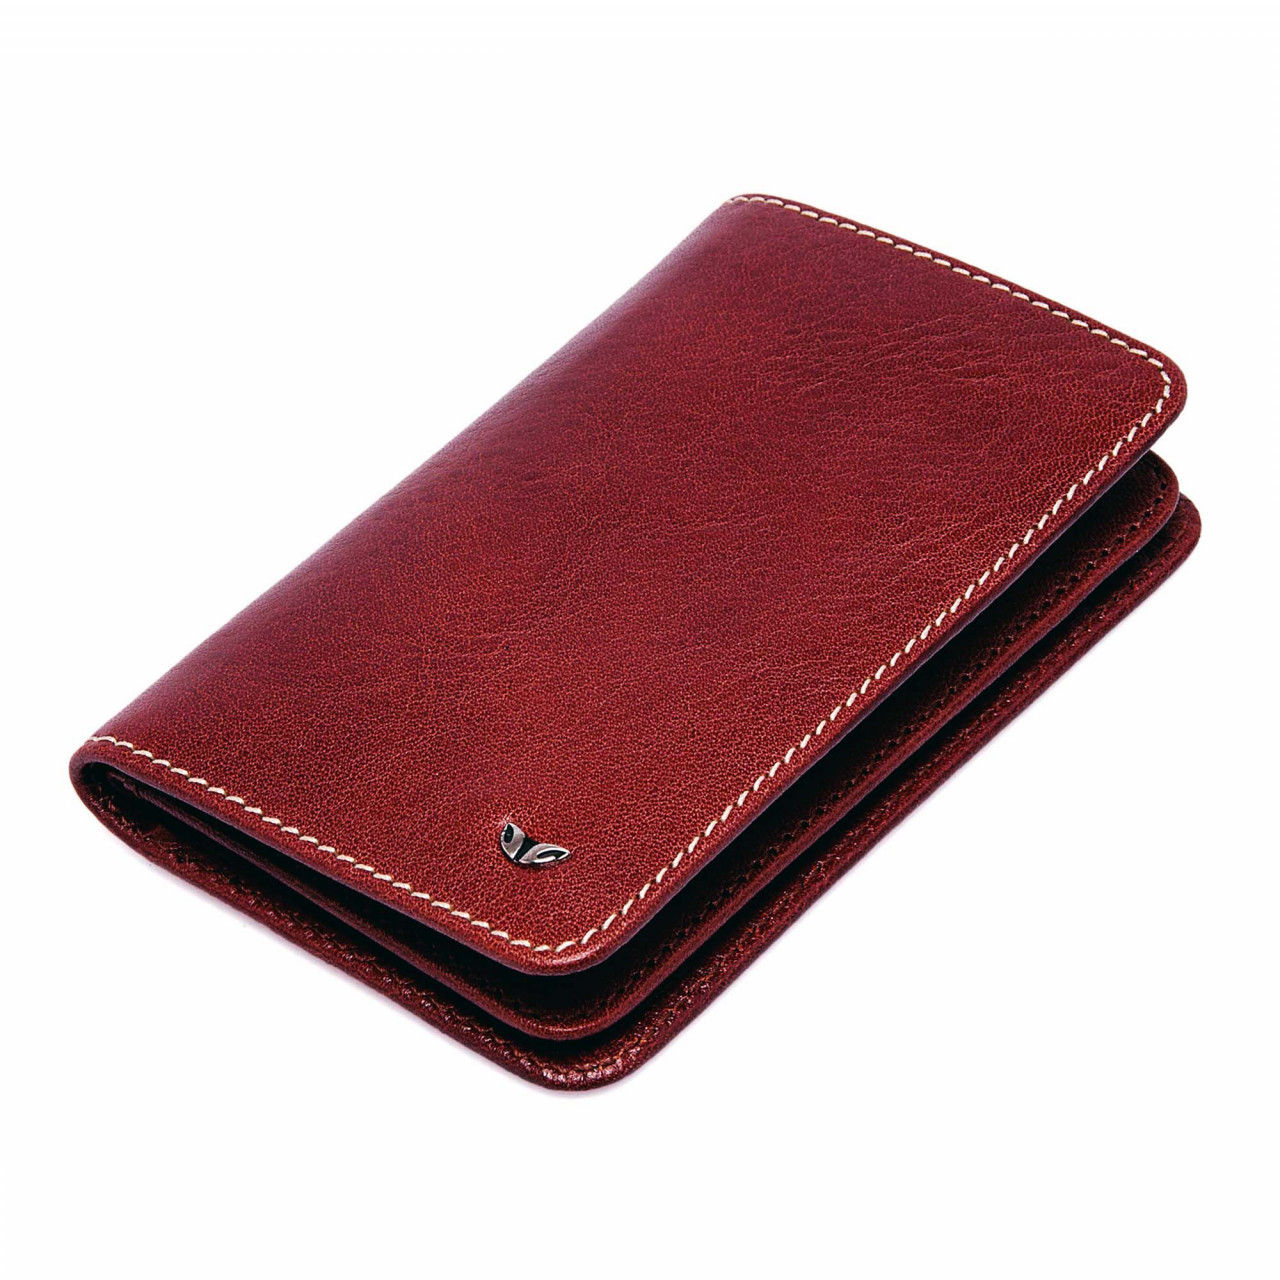 Leather Documents Holder